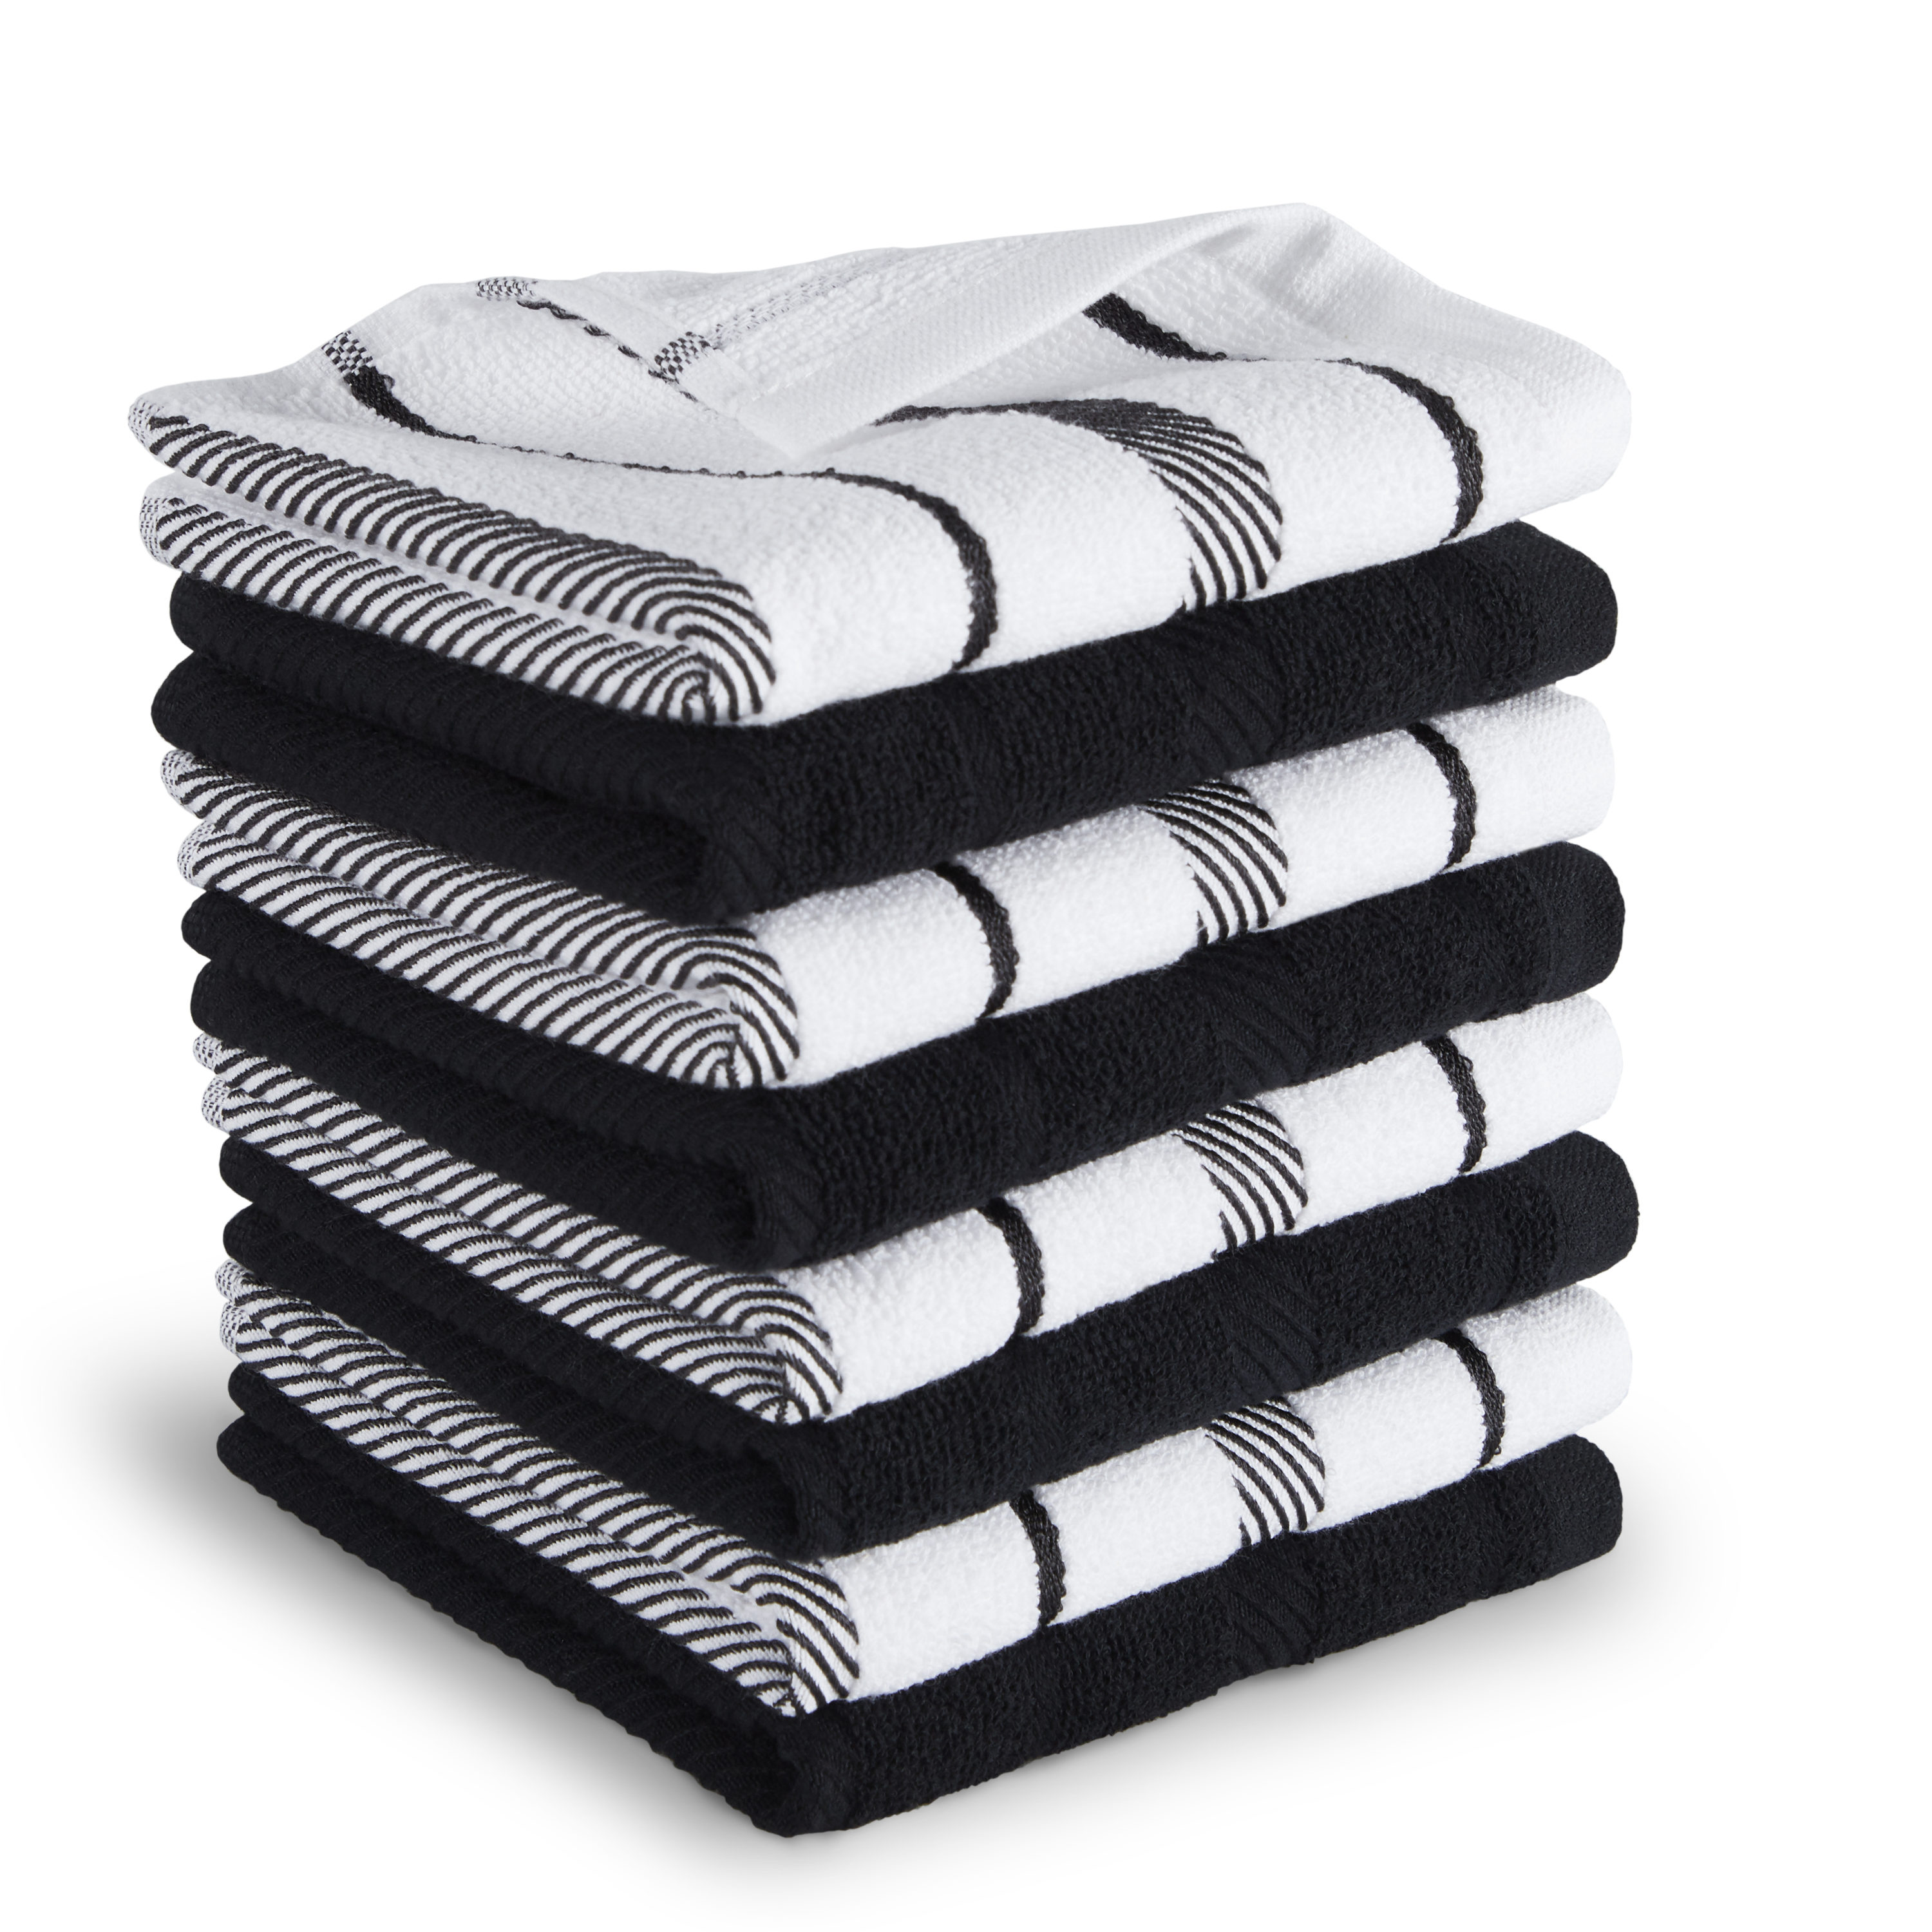 Gem Imports Terry Cotton Tea Towel Kitchen Cleaning Dish Cloths Drying Packs. Black & white 